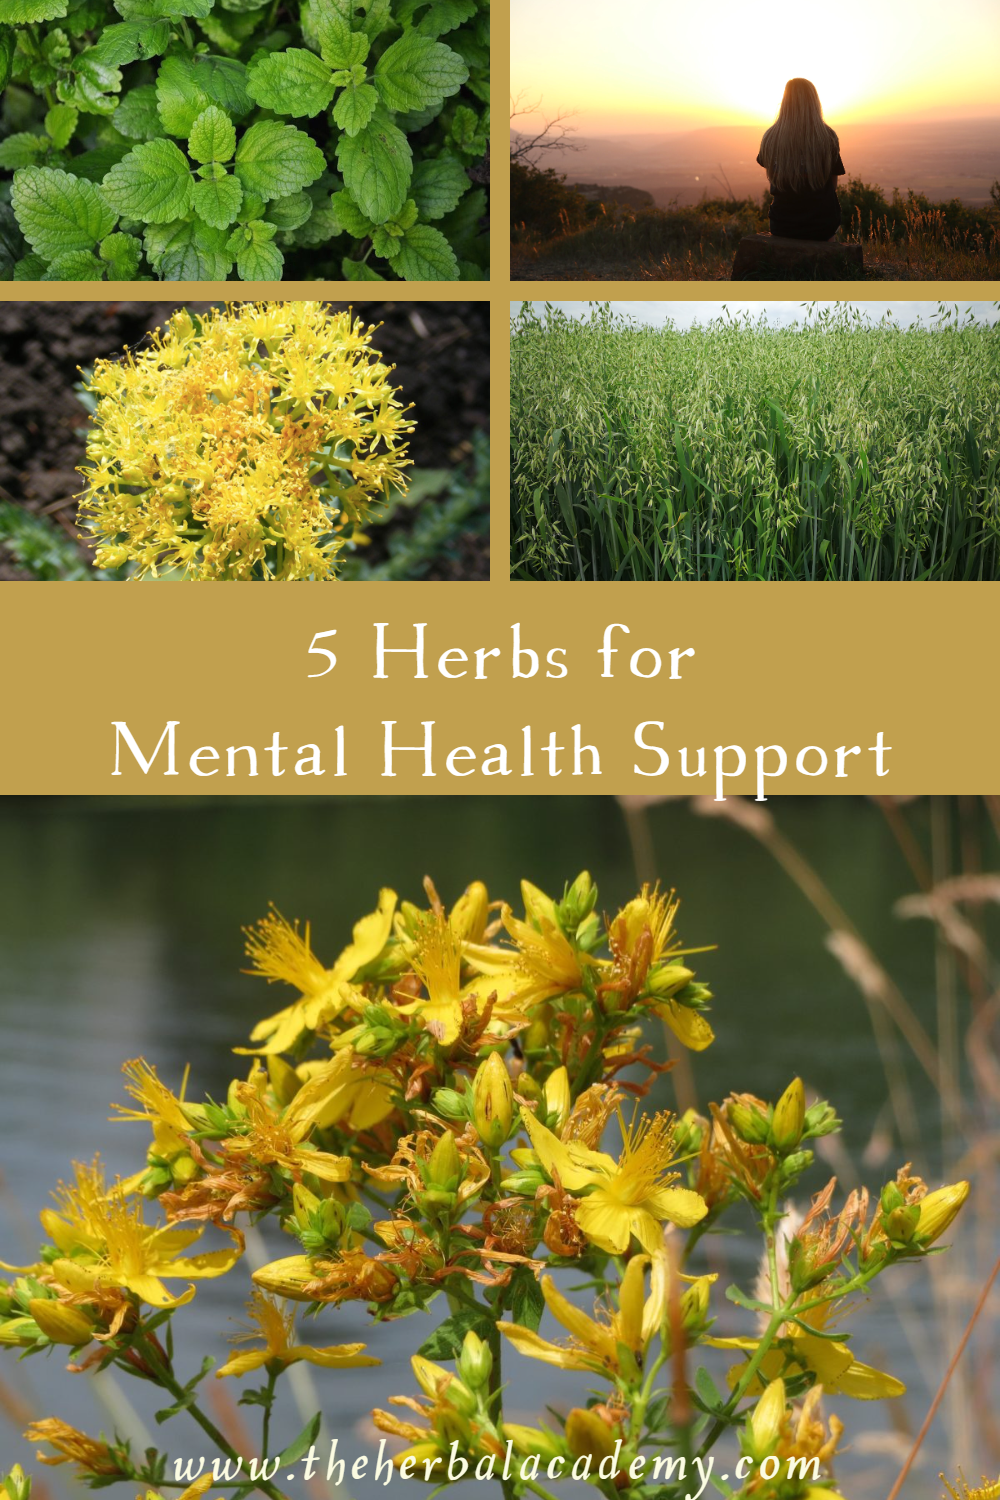 5 Herbs for Mental Health Support | Herbal Academy | As we continuously work to tend the garden of our mental health, powerful plant allies offer us support through challenges that come our way.